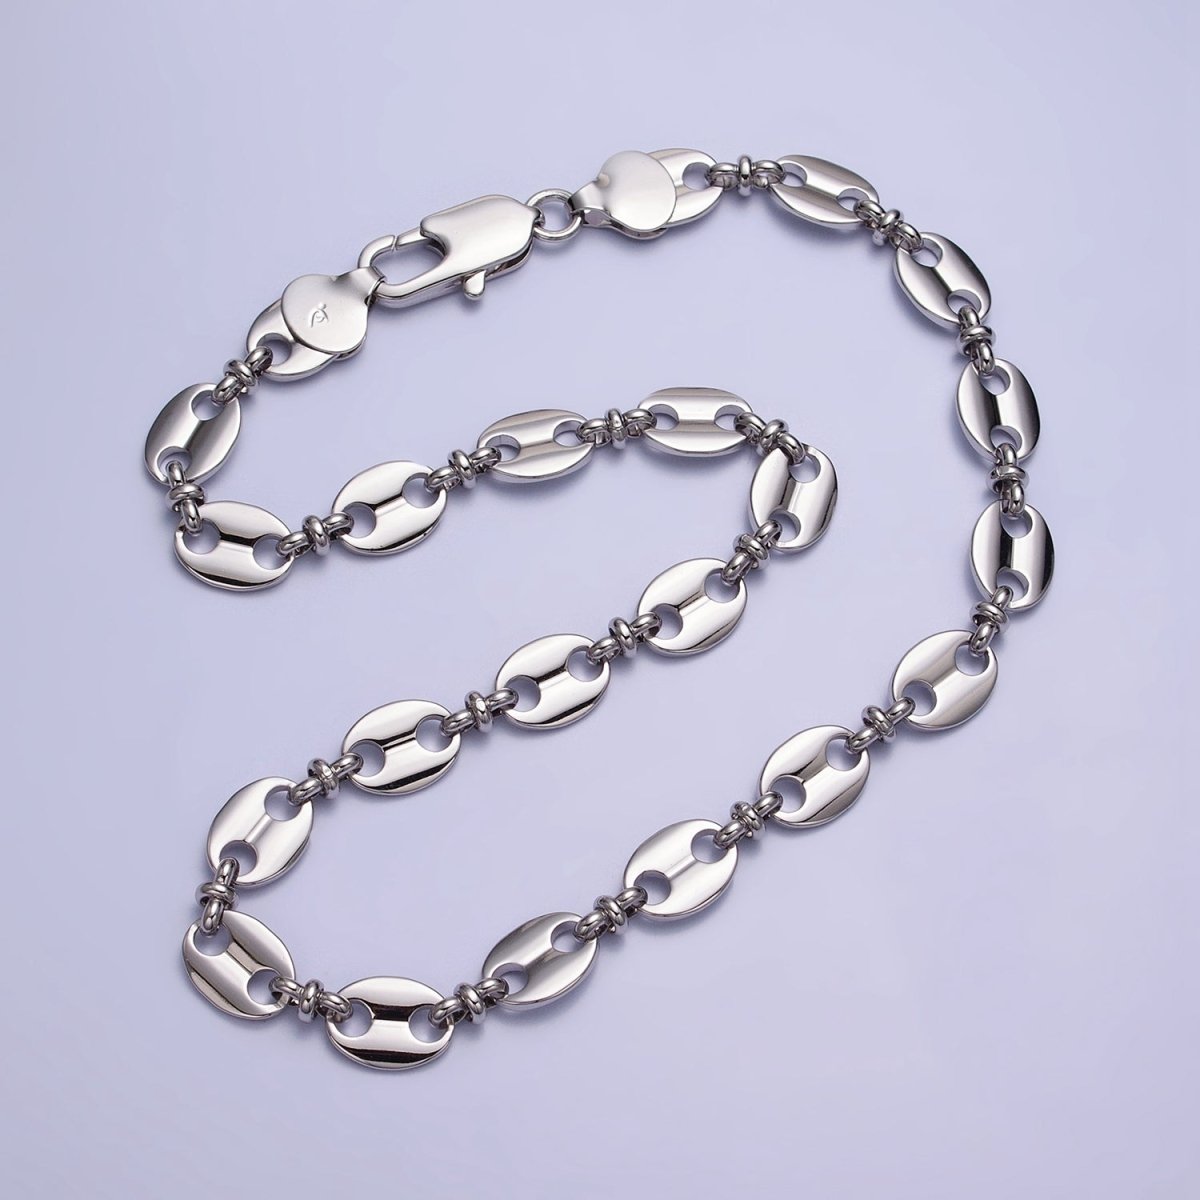 Bold Anchor Link Necklace Silver Mariner Chain Necklace for Men Women Necklace 11mm Width Link Ready to Wear Necklace Layering | WA-1598 WA-1599 Clearance Pricing - DLUXCA